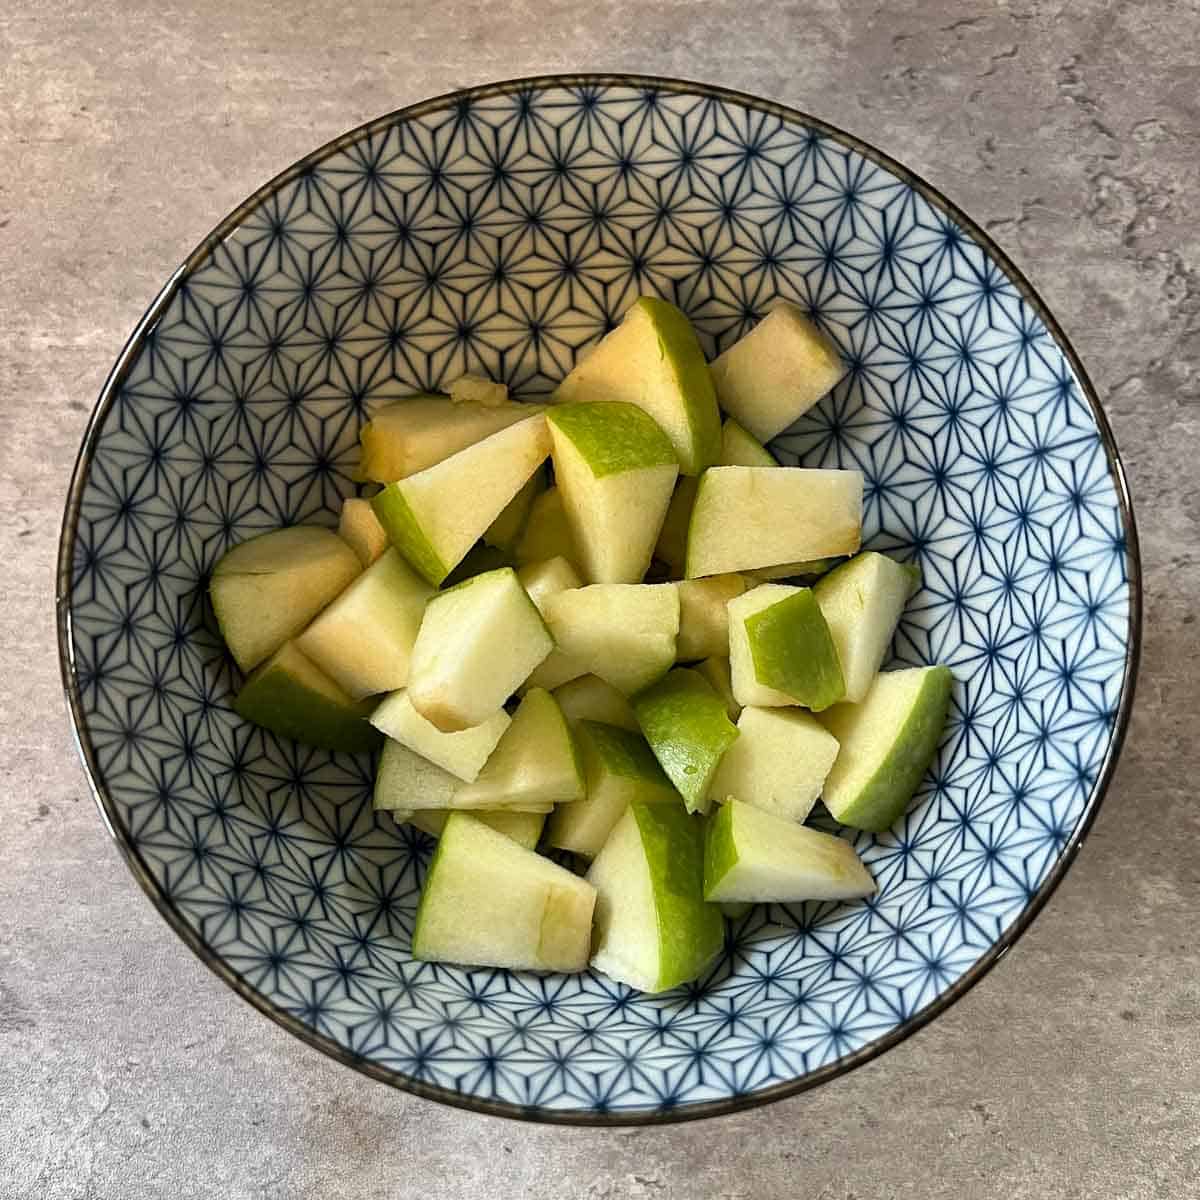 diced green apples in small blue bowl